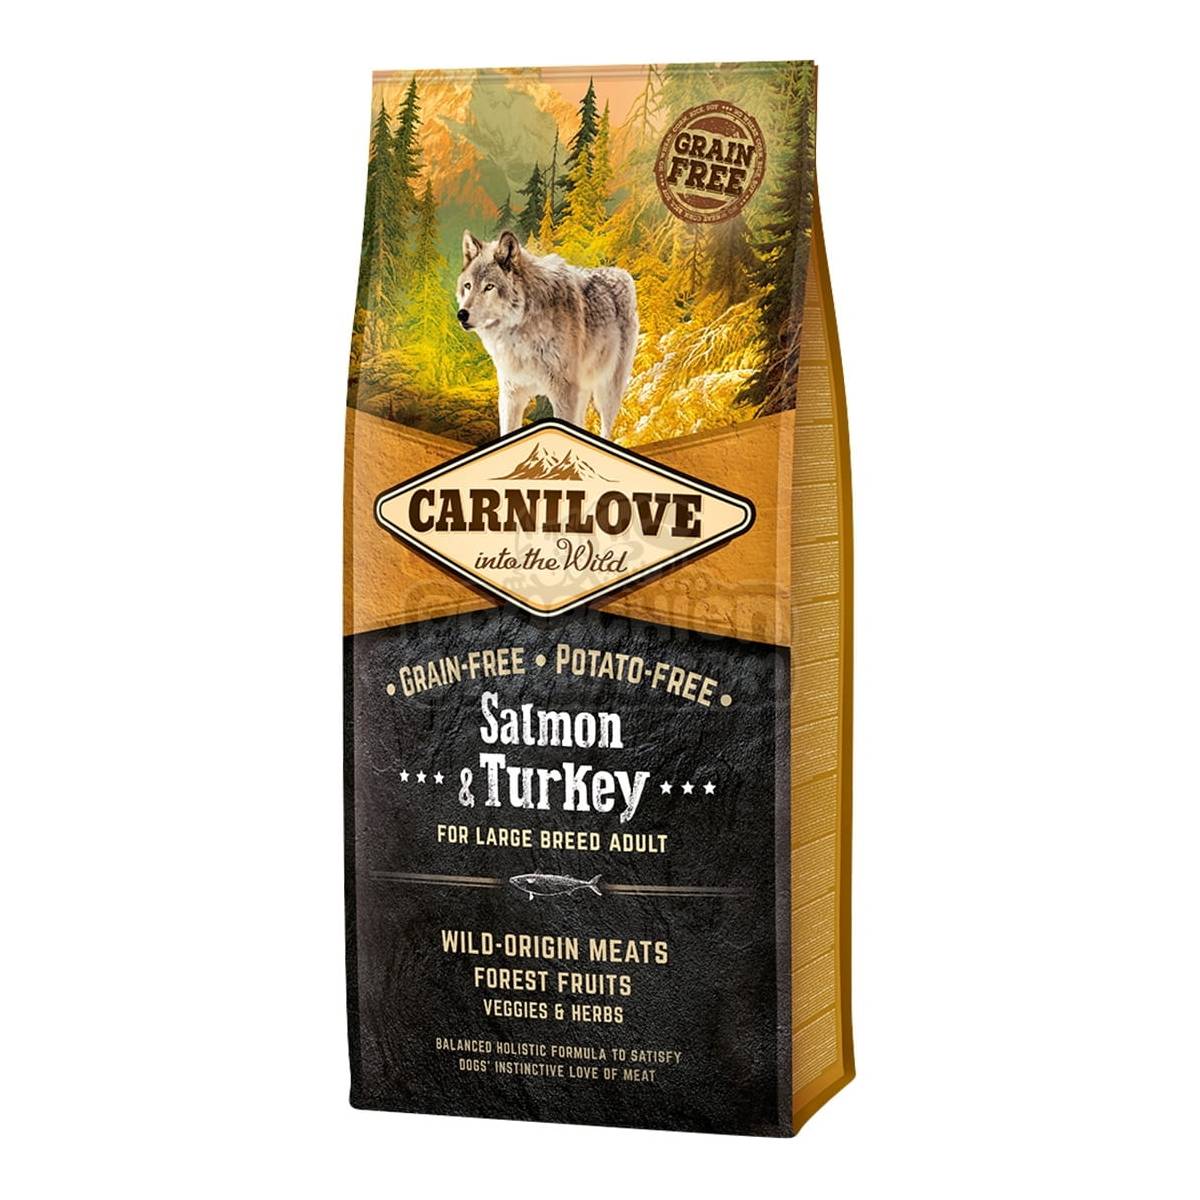 Carnilove salmon & turkey for large breed adult 12kg